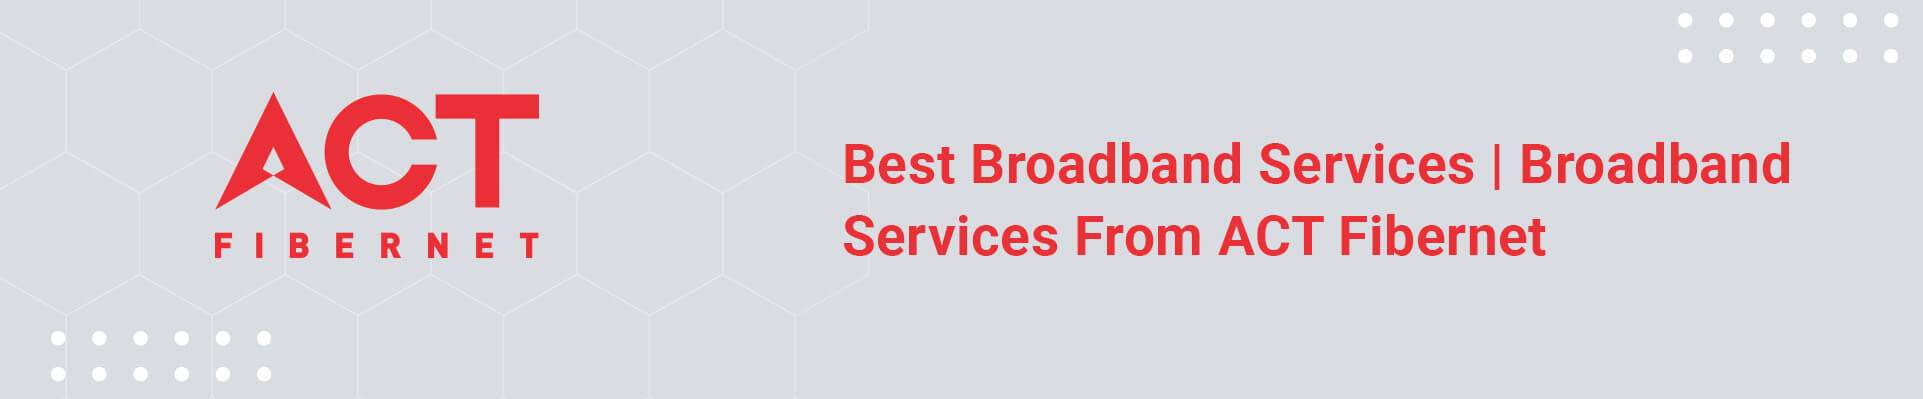 Broadband Services From ACT Fibernet